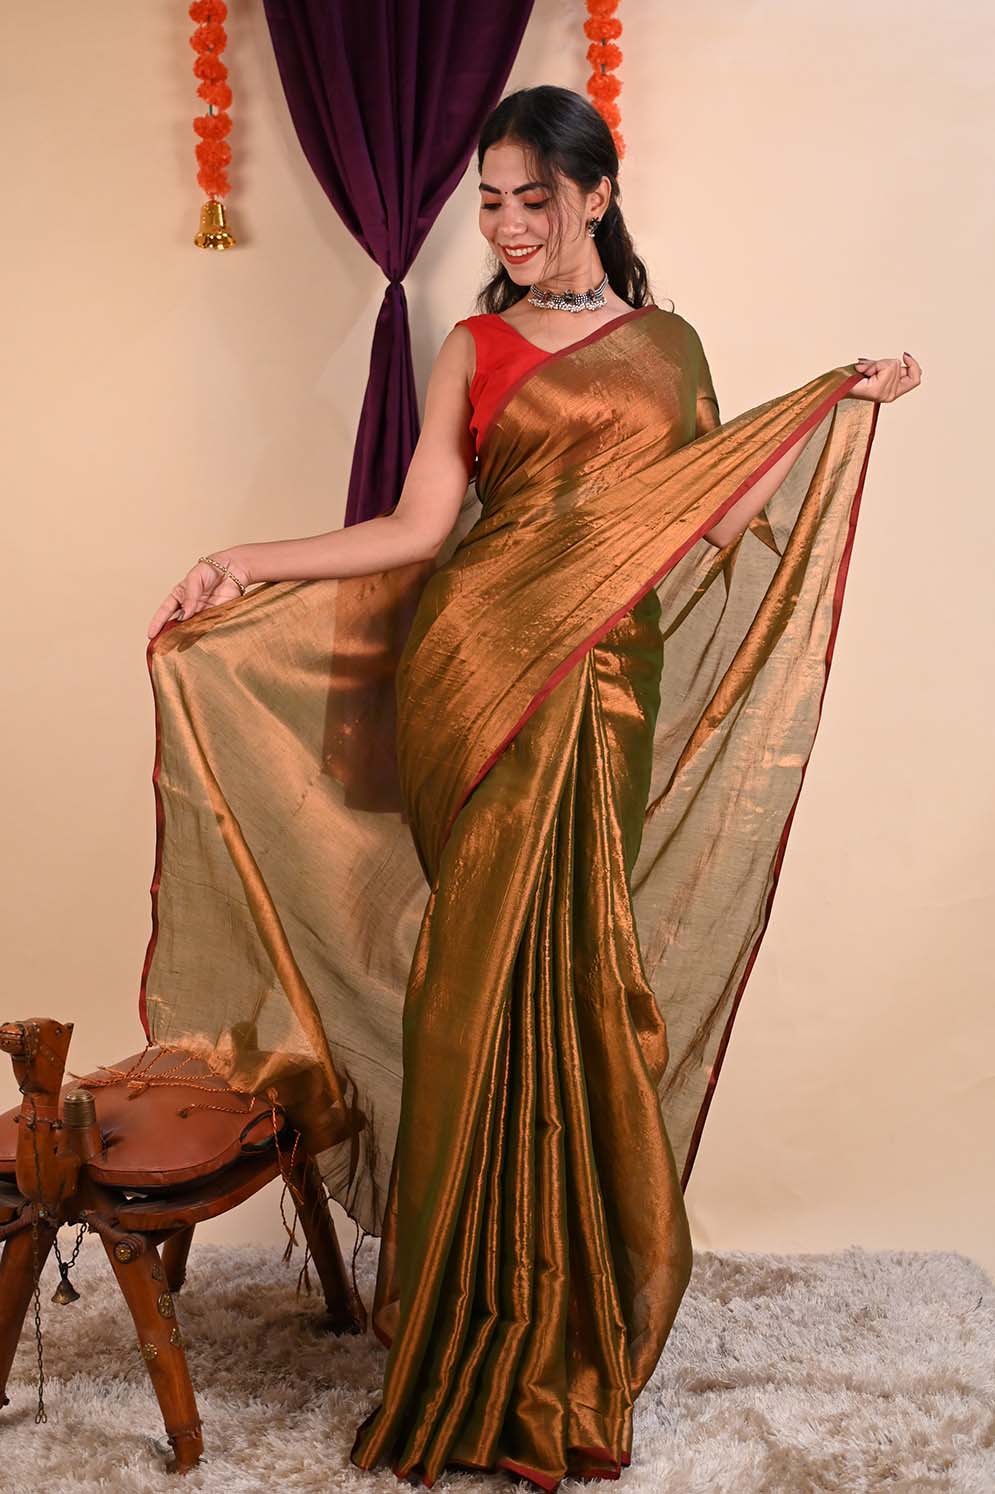 Ready To Wear Premium Organza Tissue With Tassels Dhoop Chaanv Copper Gold On Pallu  Wrap in 1 minute saree - Isadora Life